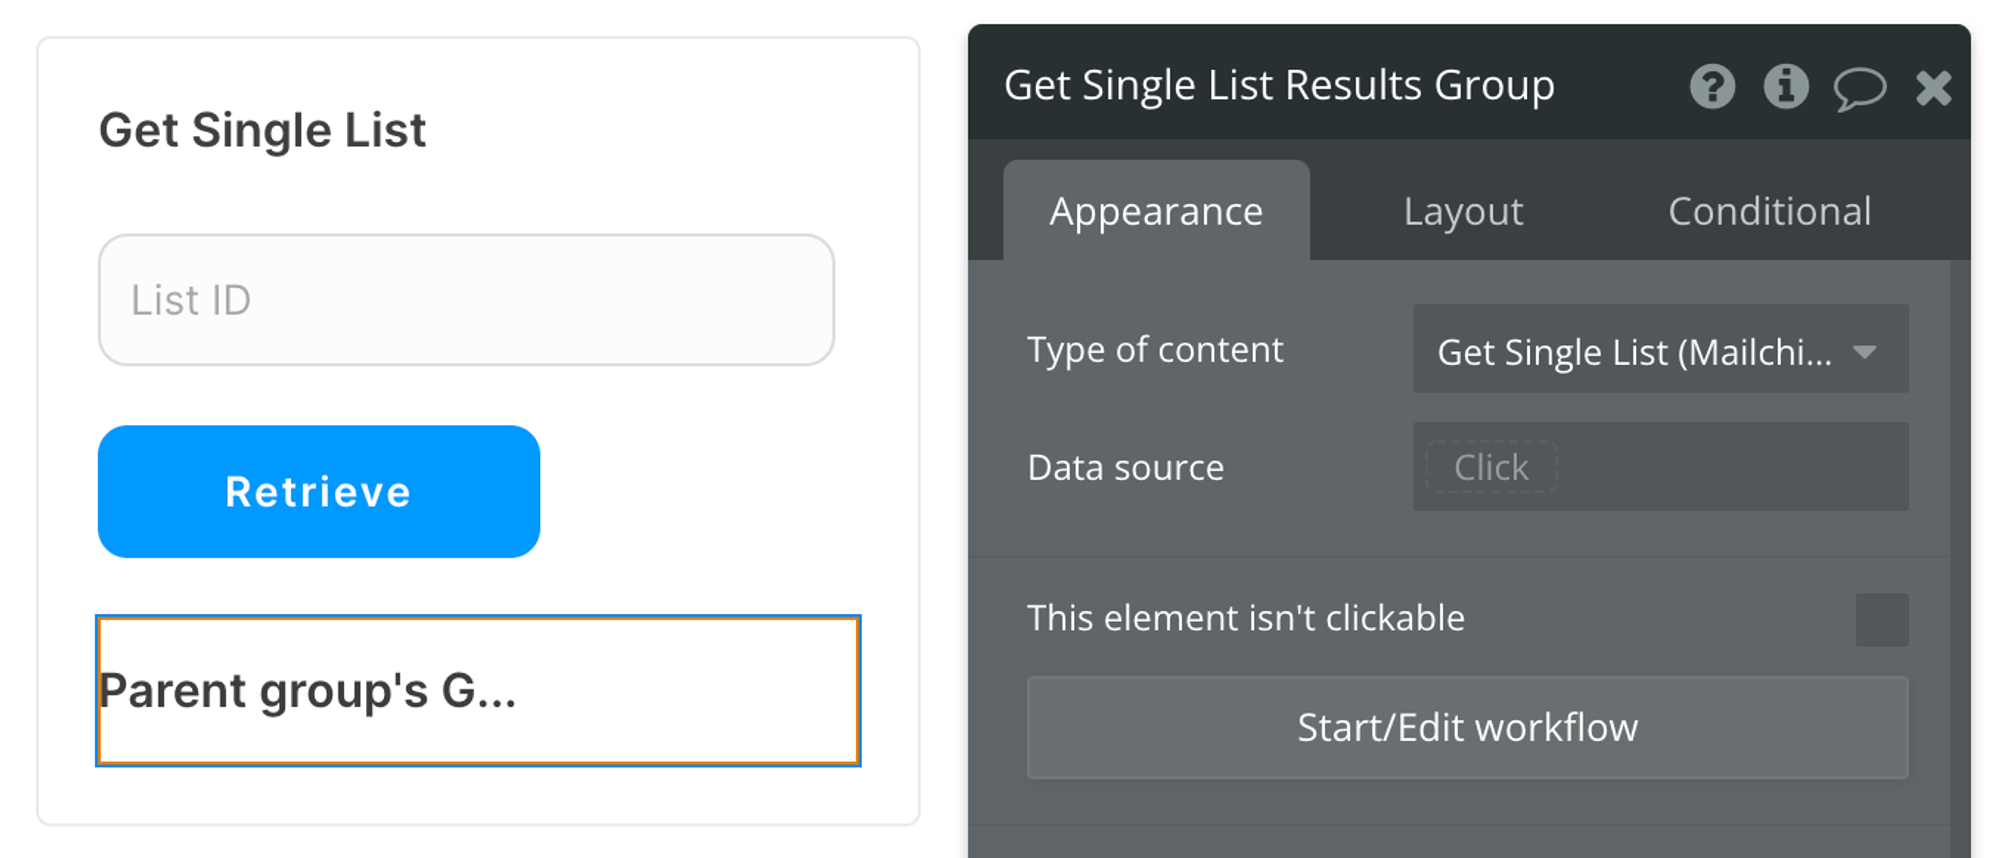 Select Get Single List (Mailchimp Extended) from the list of content types